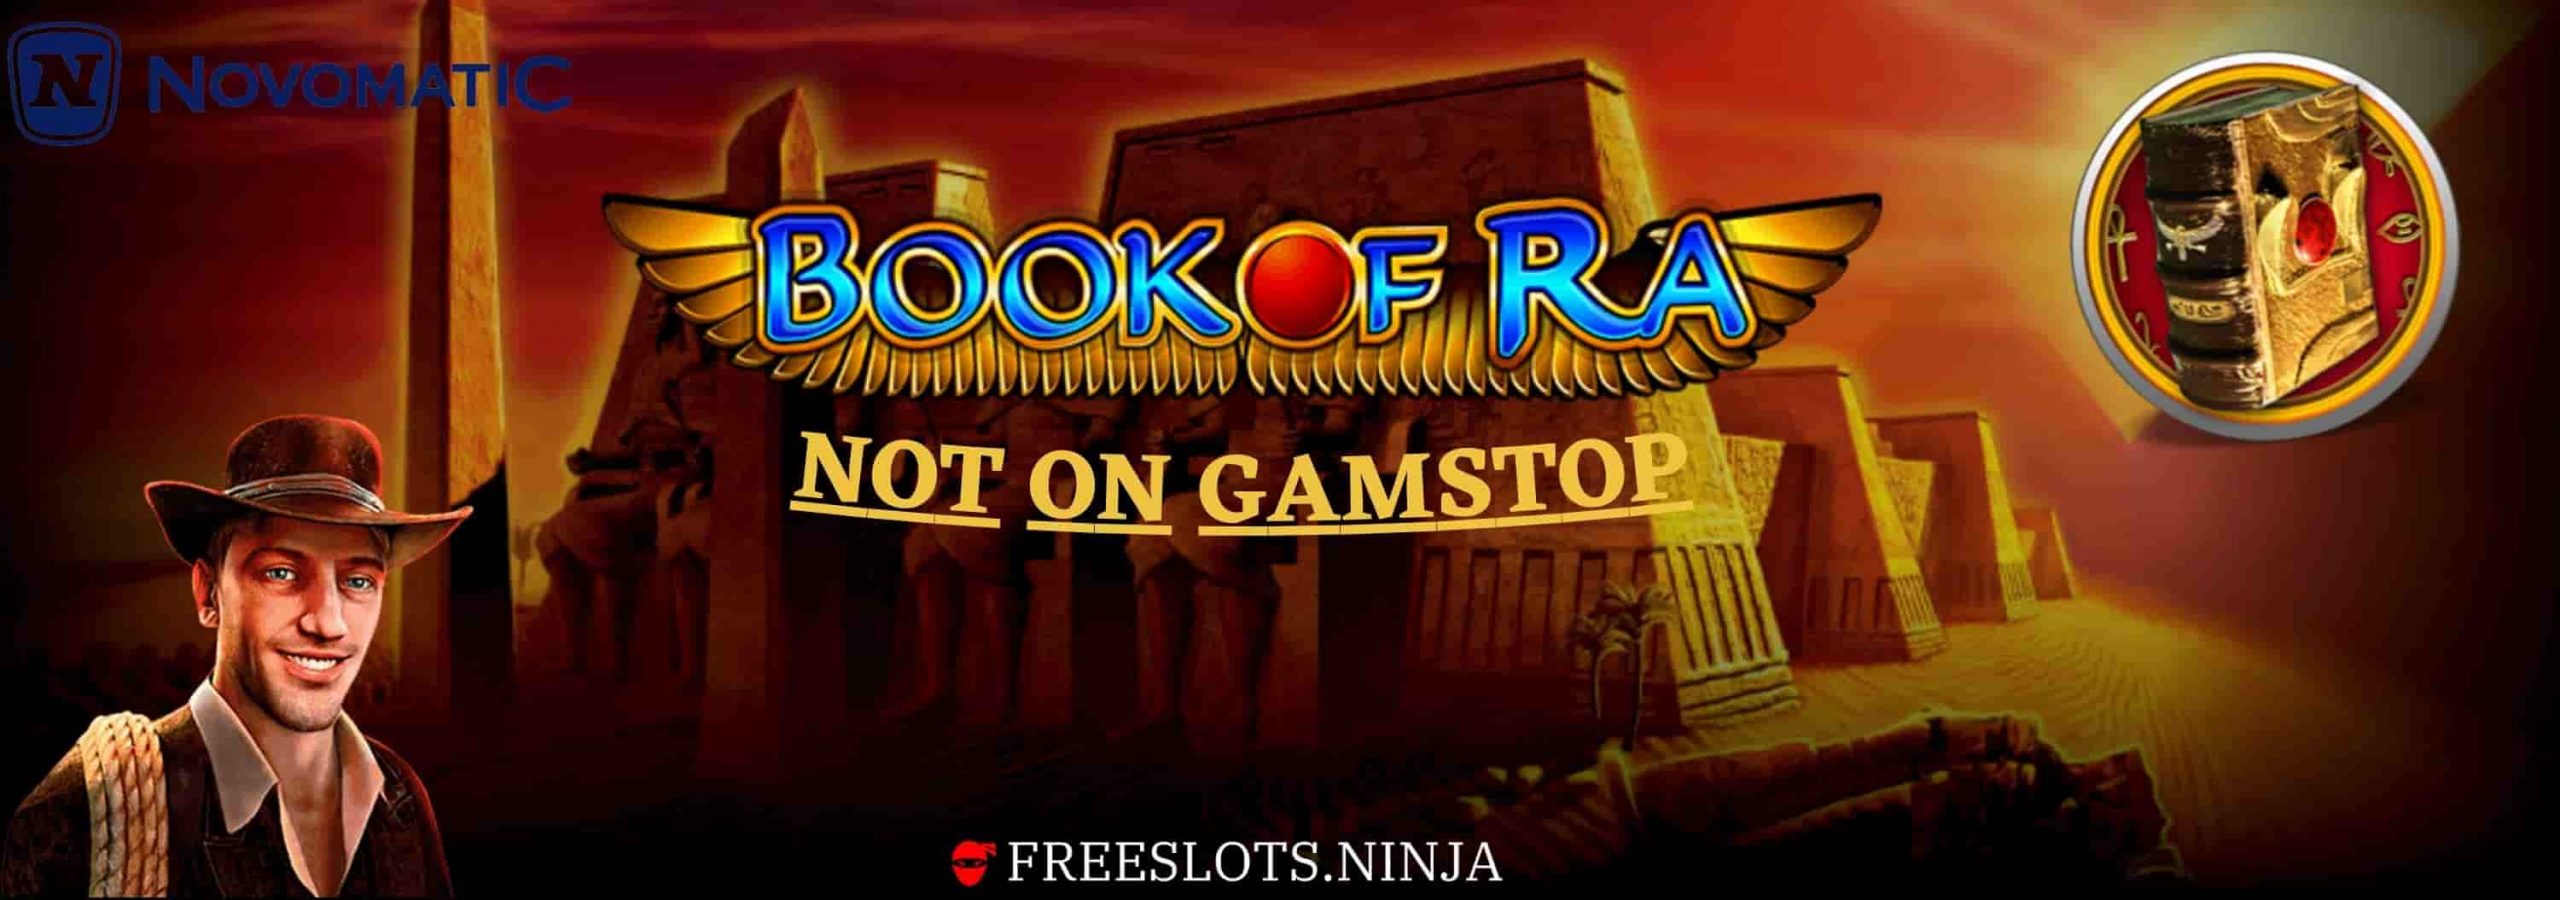 book of ra not blocked by gamstop